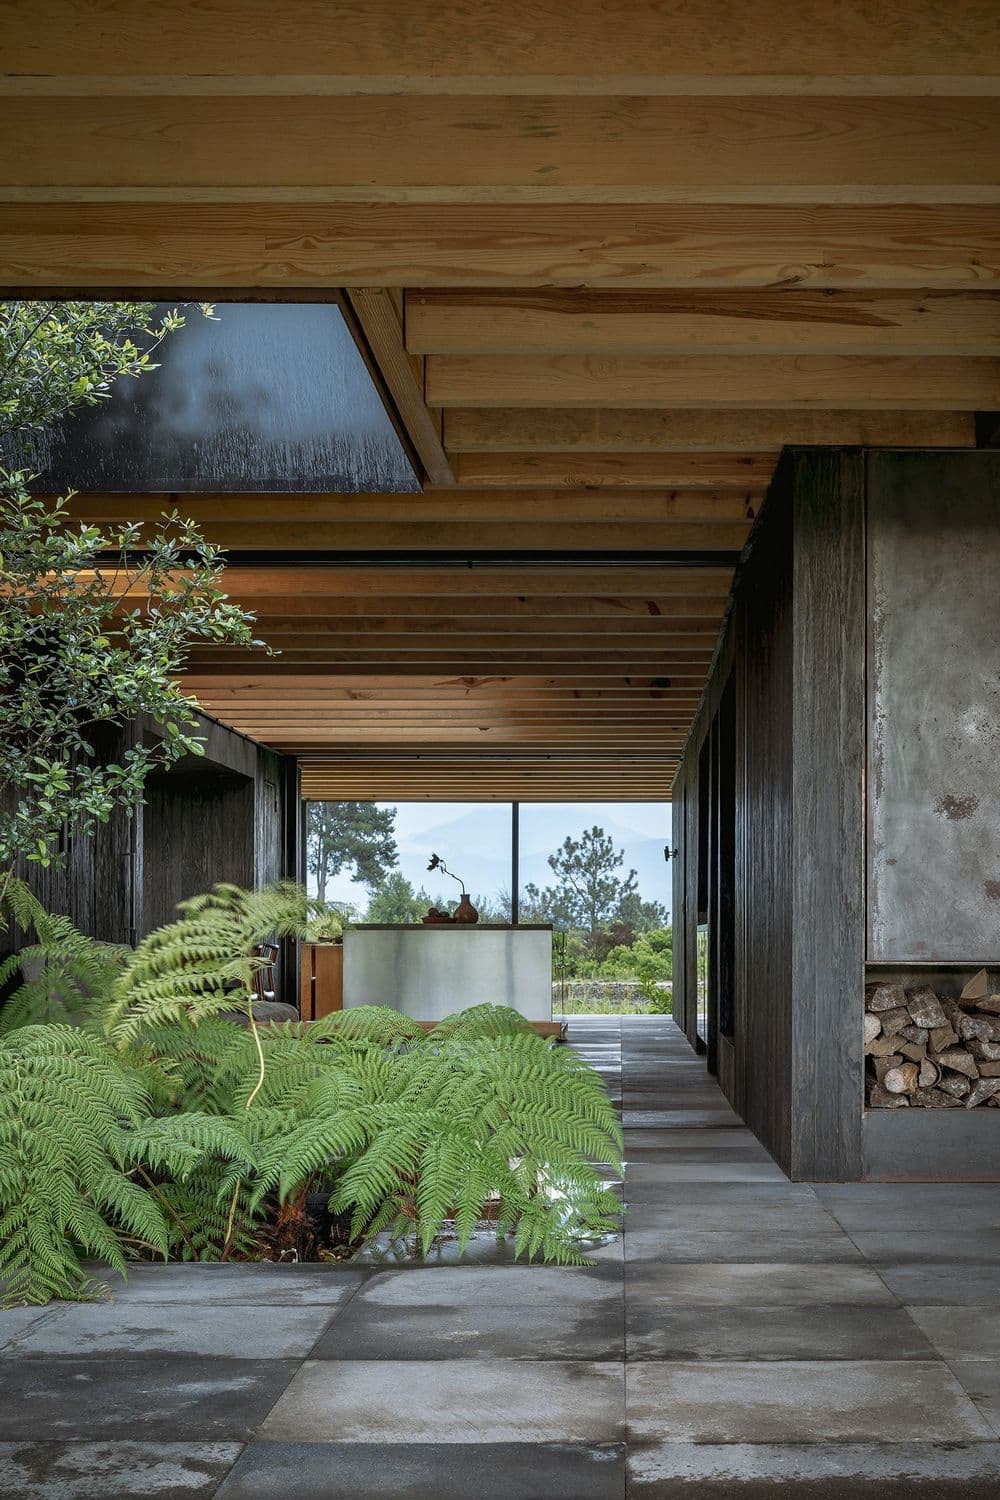 Rain Harvest Home - Net Zero House Equipped with a Green Roof and Sustainable Bathhouse